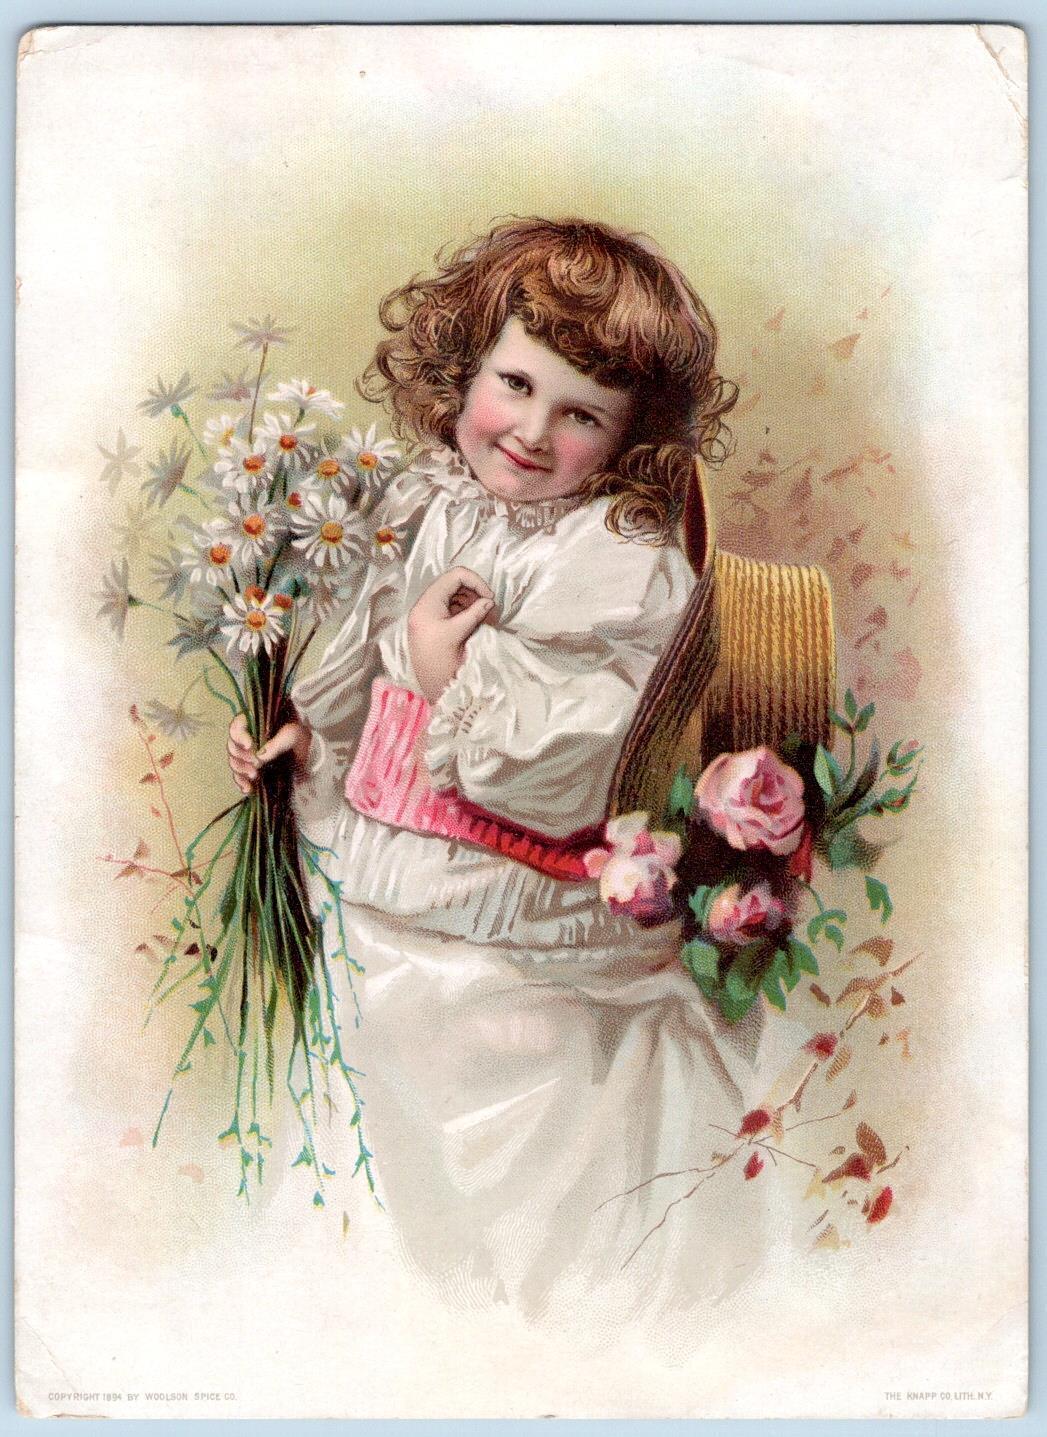 1894 LION COFFEE WOOLSON SPICE CO MIDSUMMER GREETING GIRL DAISIES TRADE CARD